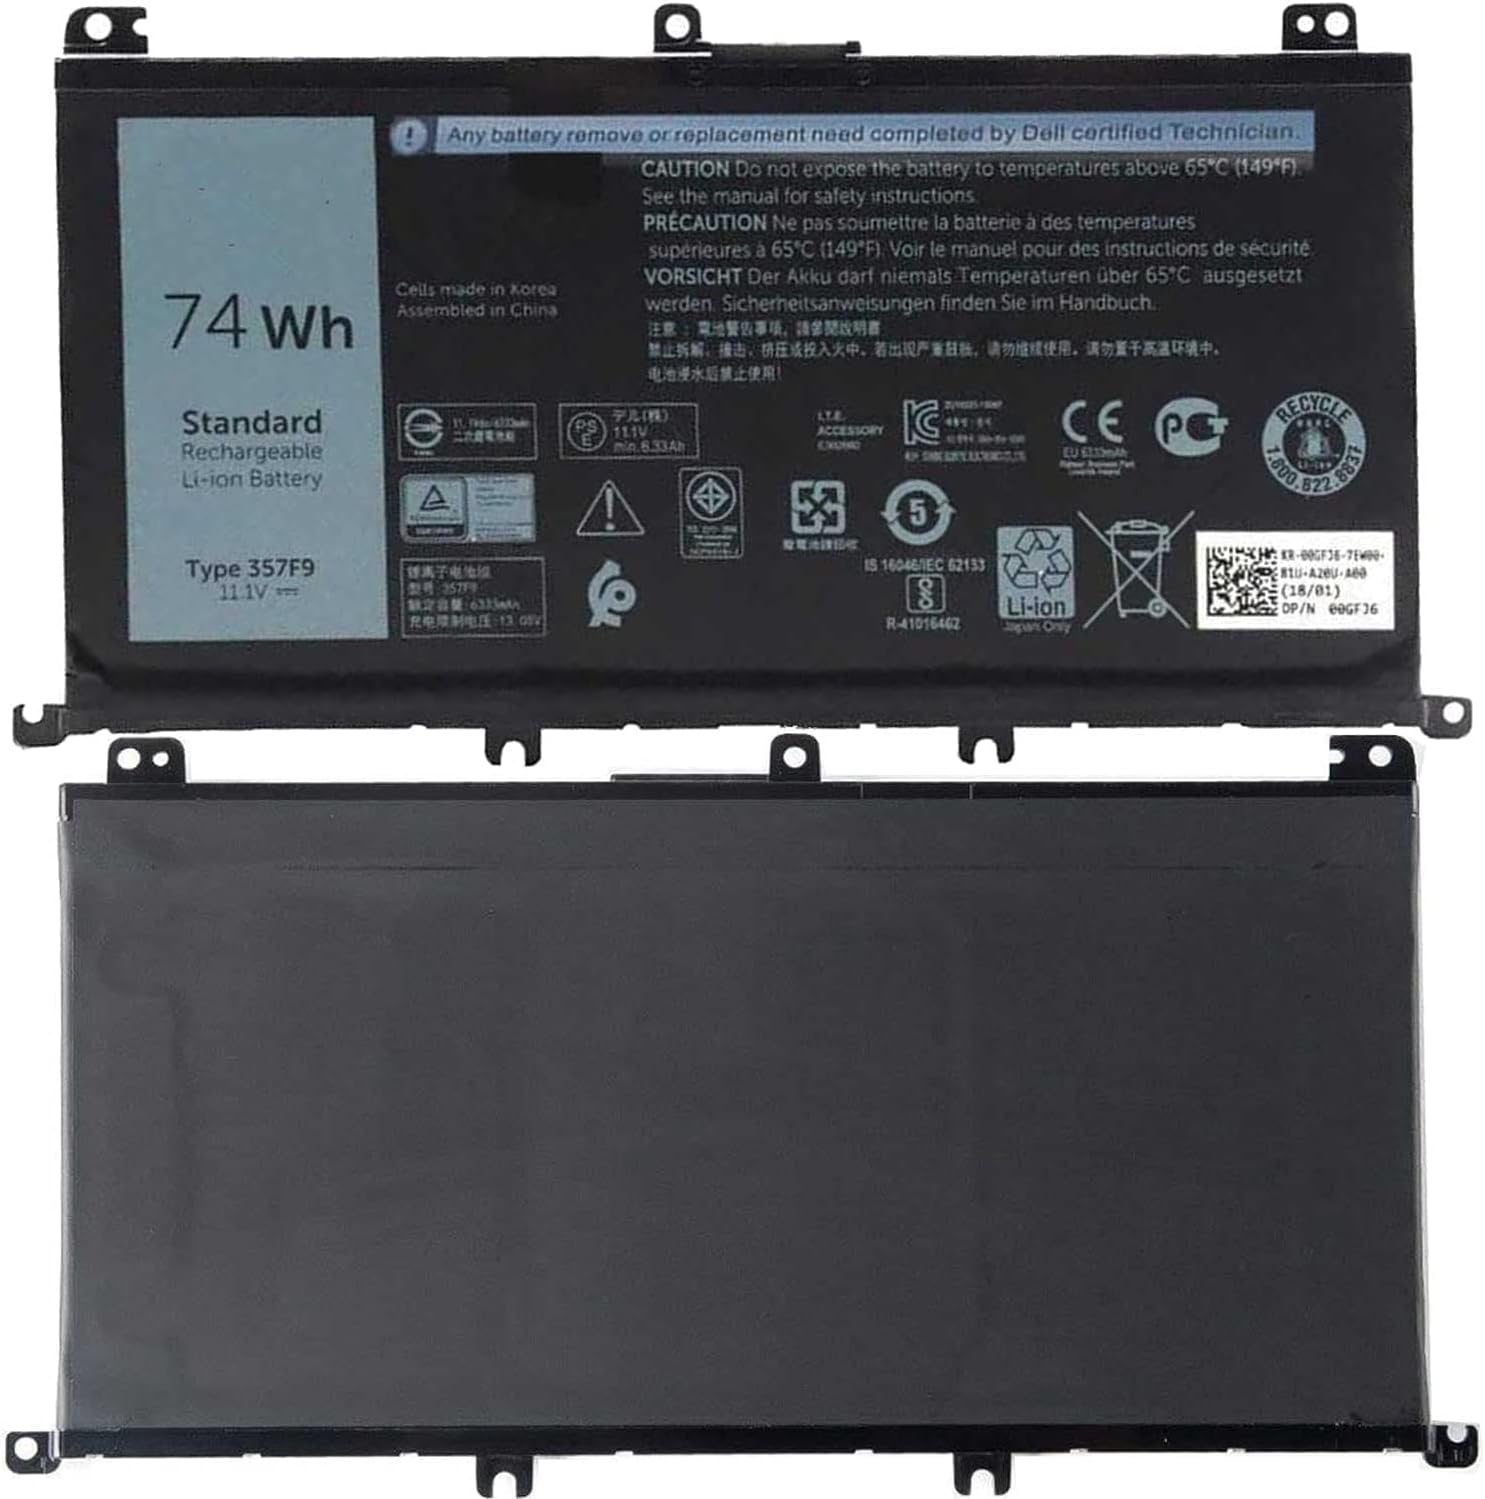 DELL 357F9 Laptop Battery Replacement for Dell 15 7559 7557 5576 5577 7566 7567 7759 INS15PD NS15PD Series 357F9, 0GFJ6, 71JF4